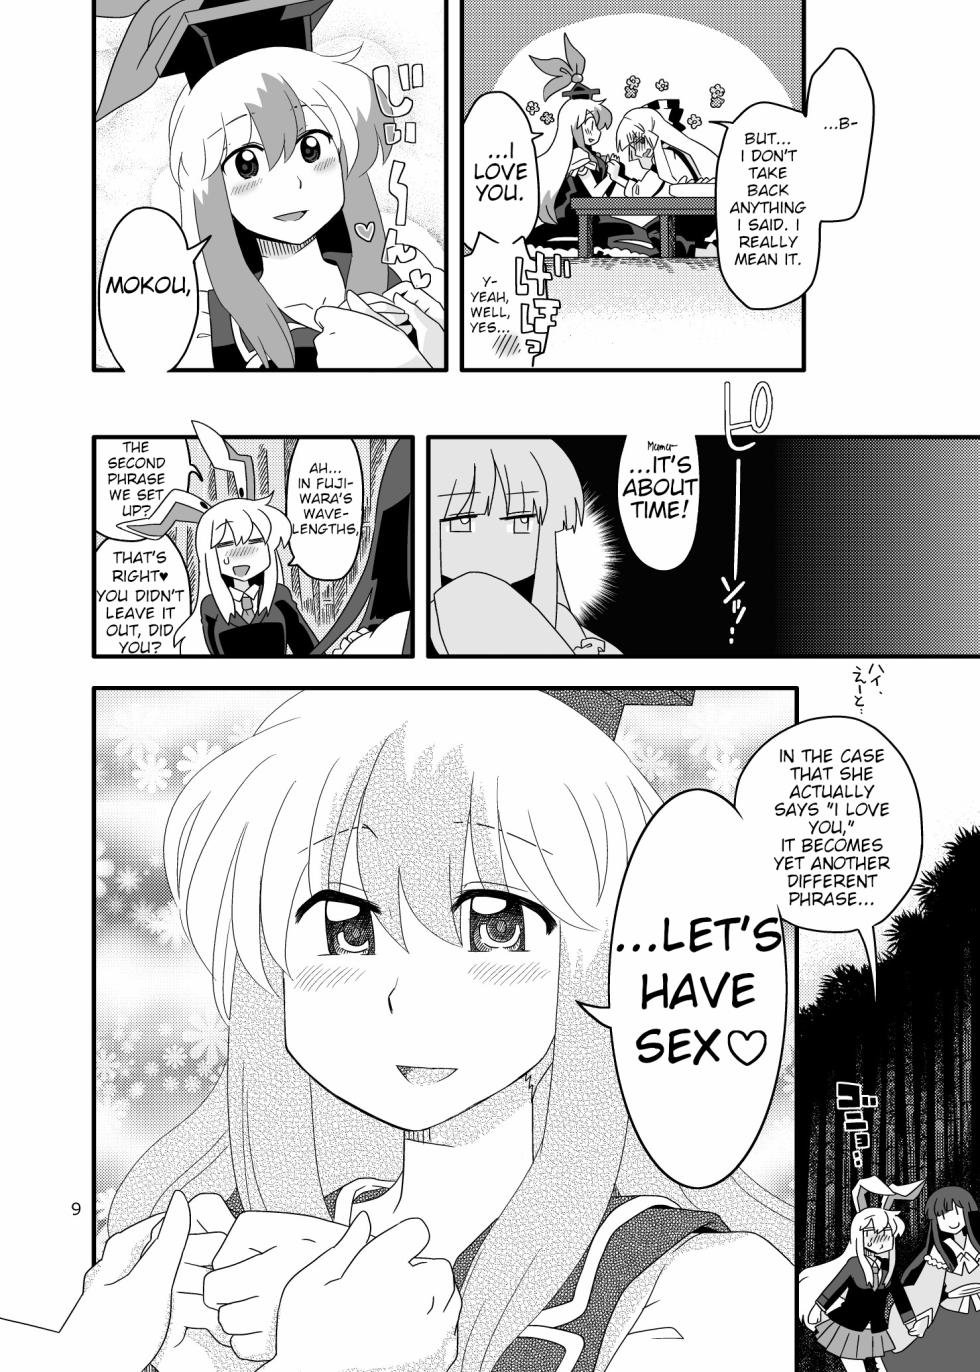 [RUMP (Bon)] Red History to Green Spice 4 (Touhou Project) [English] - Page 8